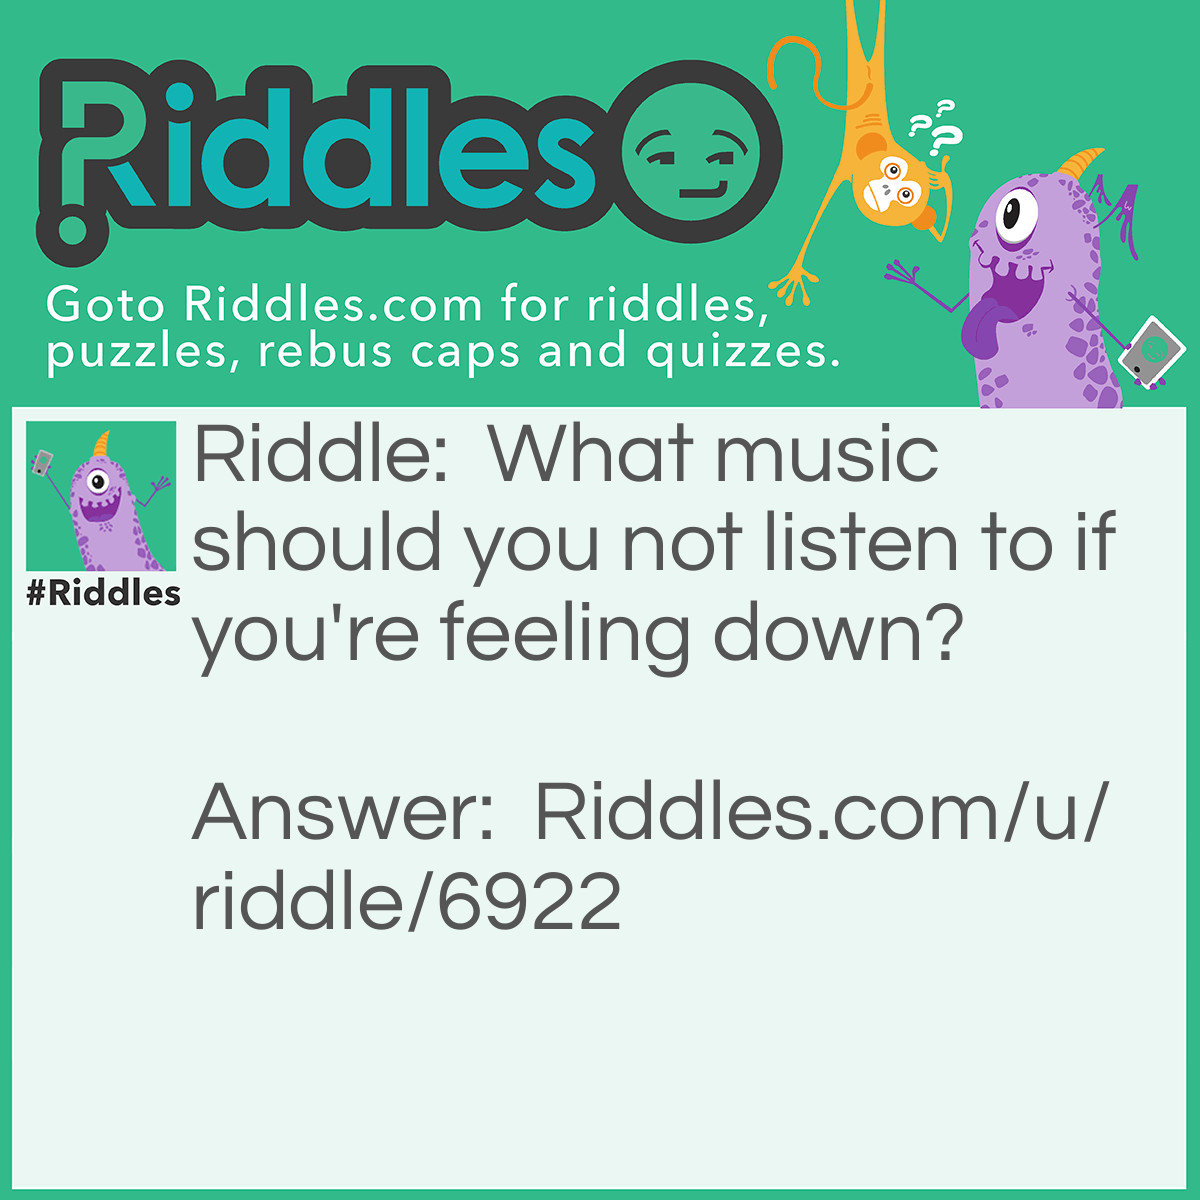 Riddle: What music should you not listen to if you're feeling down? Answer: The "Blues".